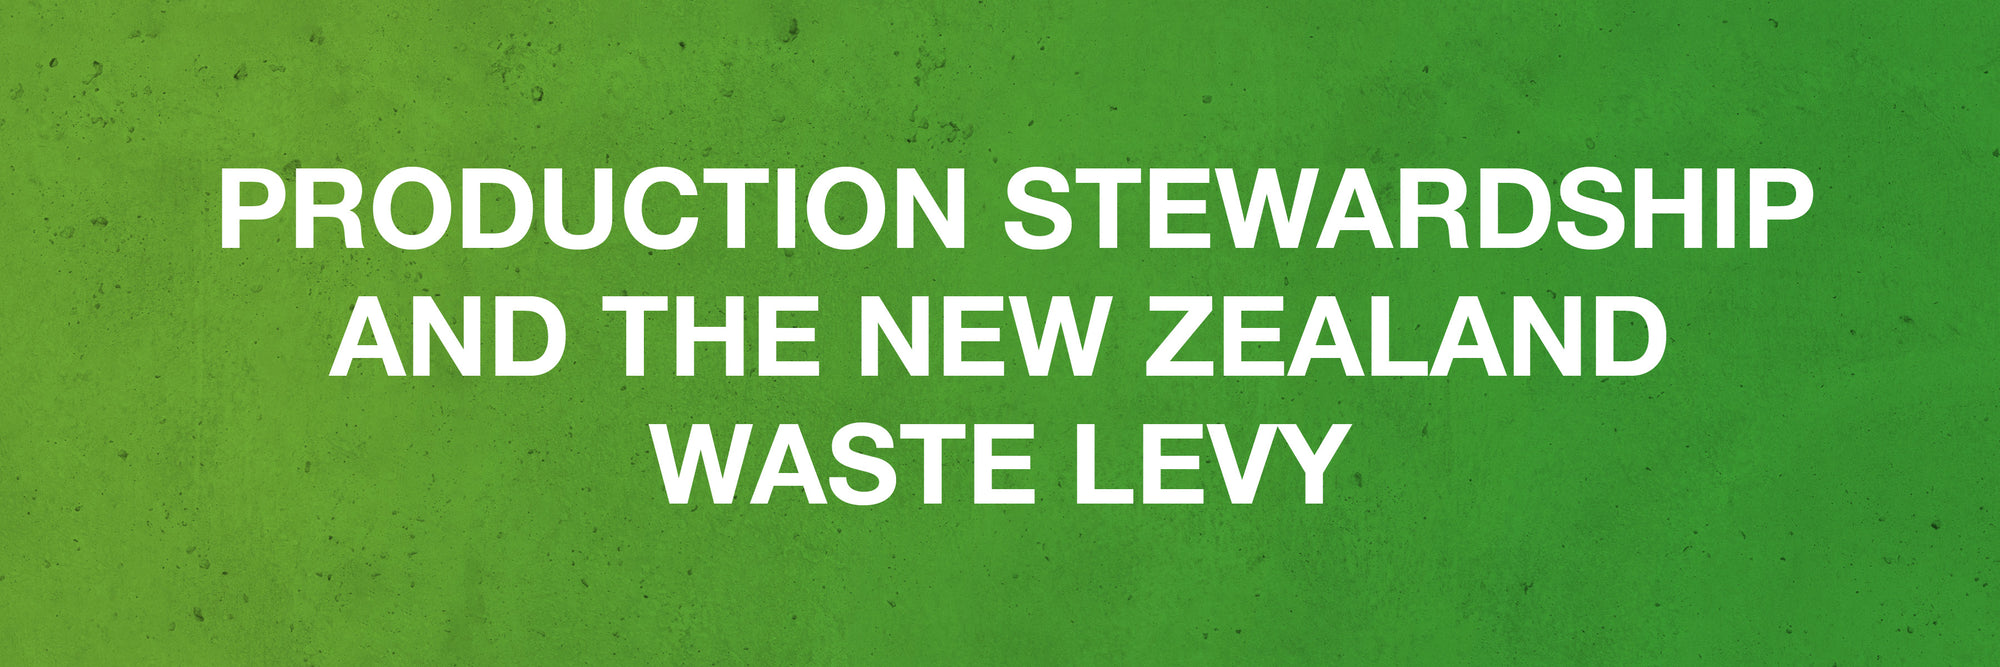 Production Stewardship and the New Zealand Waste Levy